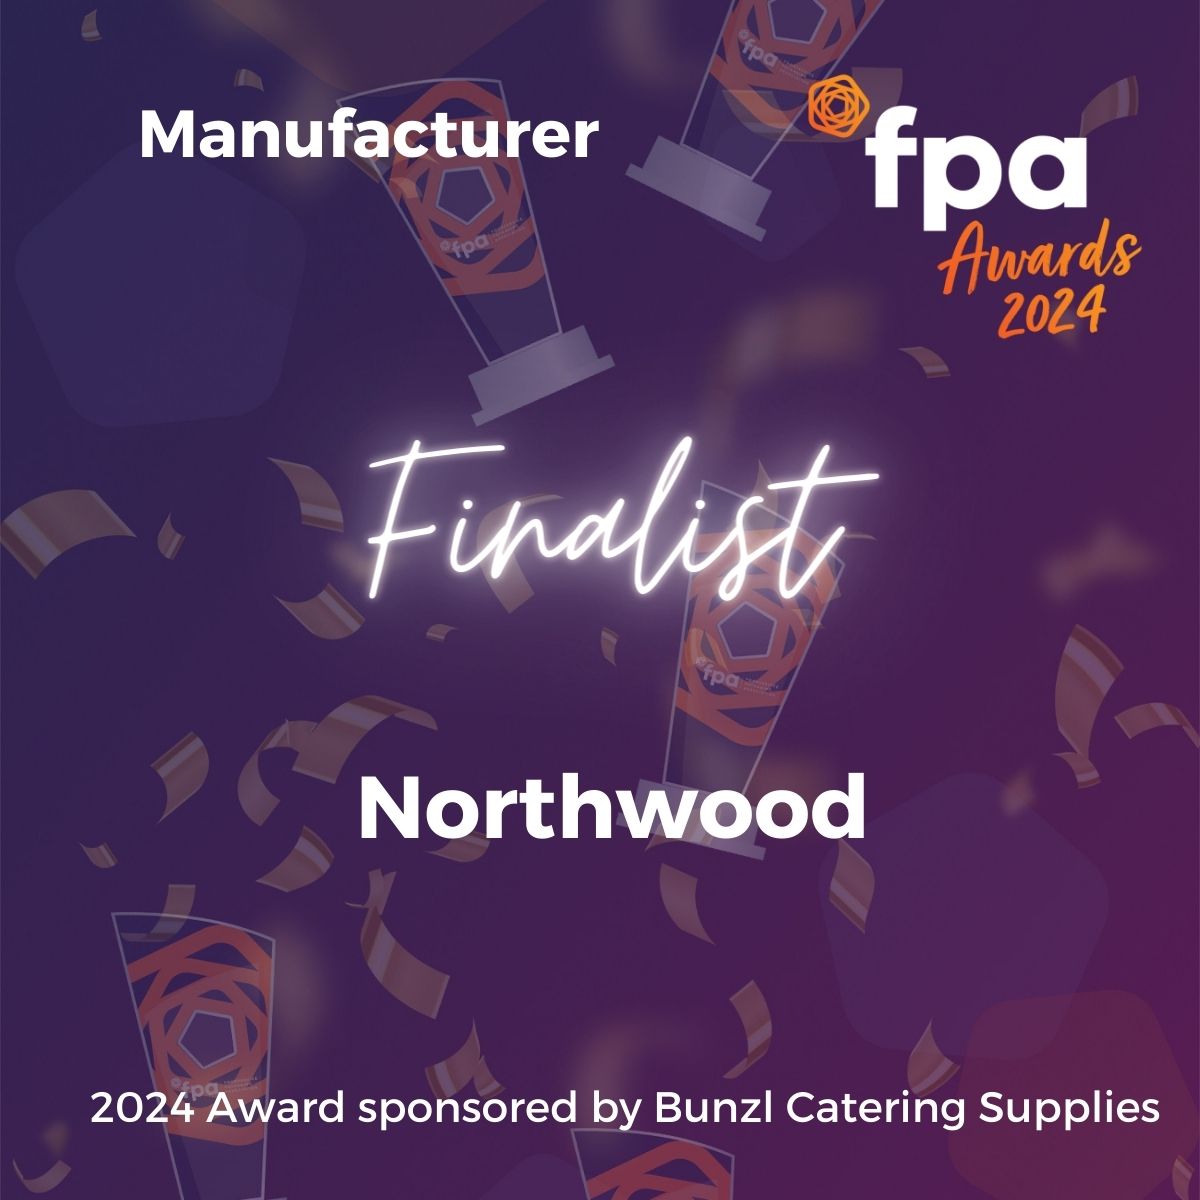 Finalist for the Manufacturer Award, sponsored by @BunzlCatering, is Northwood